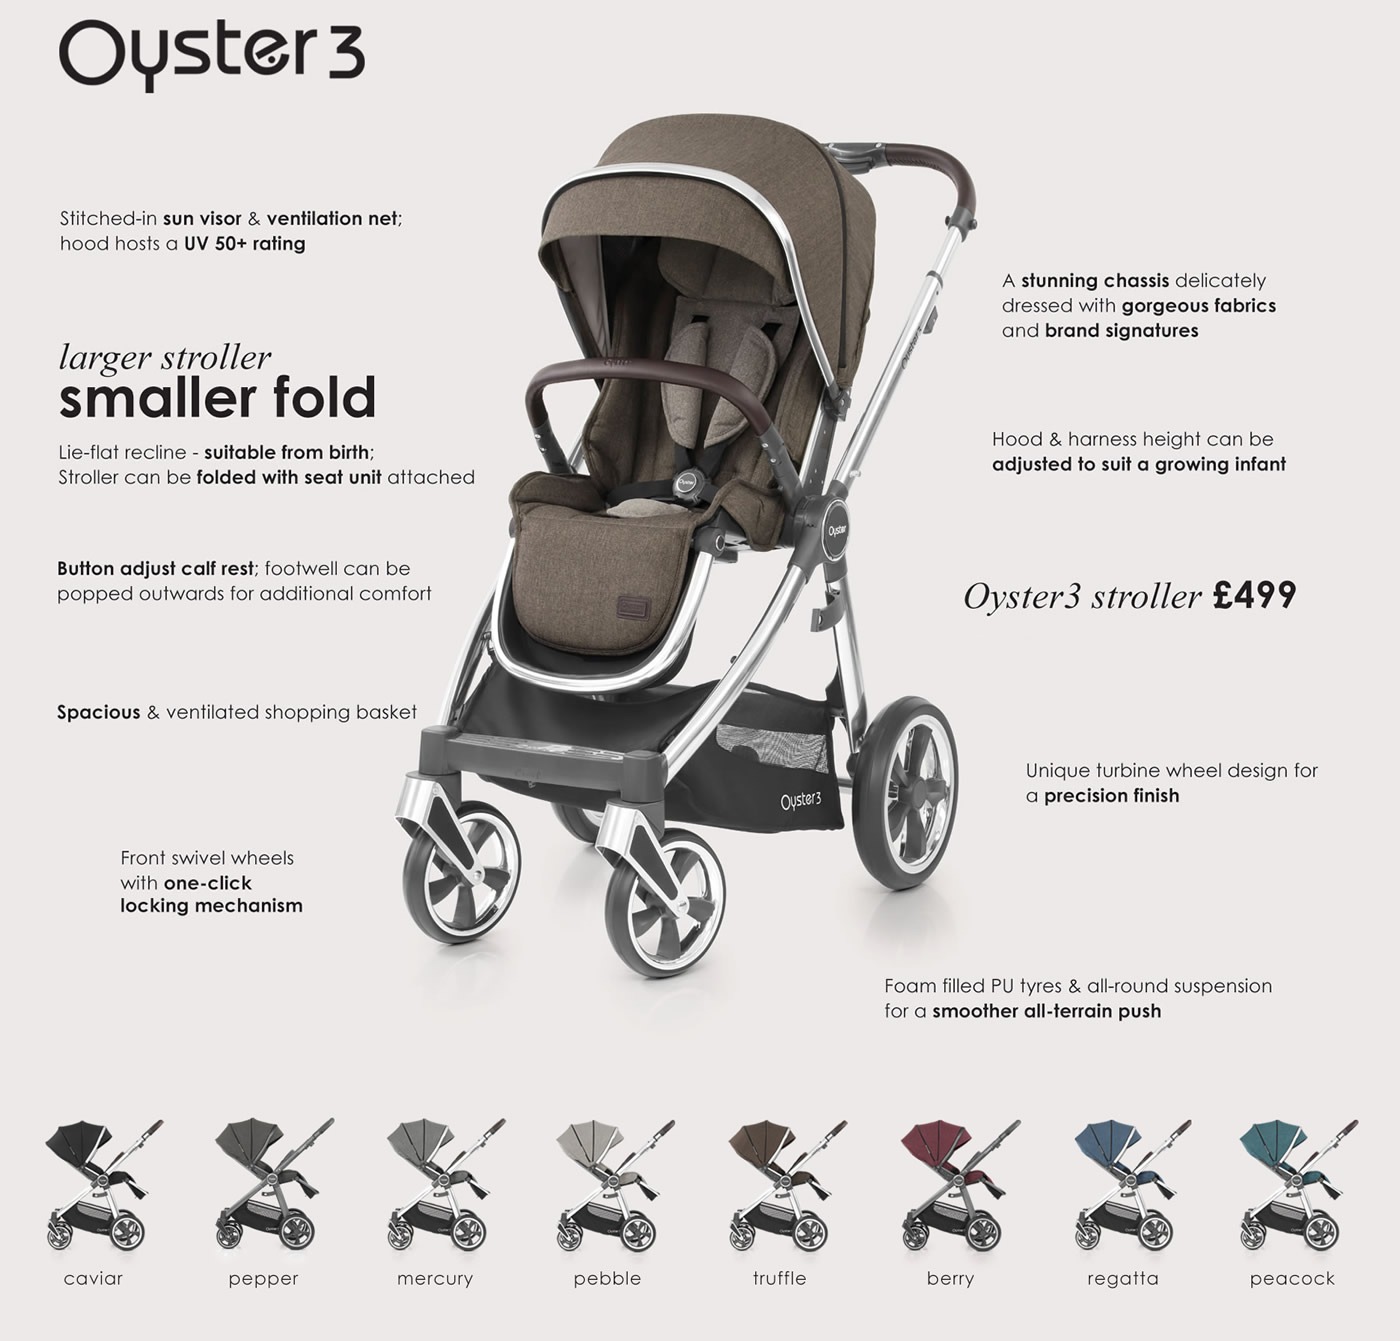 babystyle oyster 3